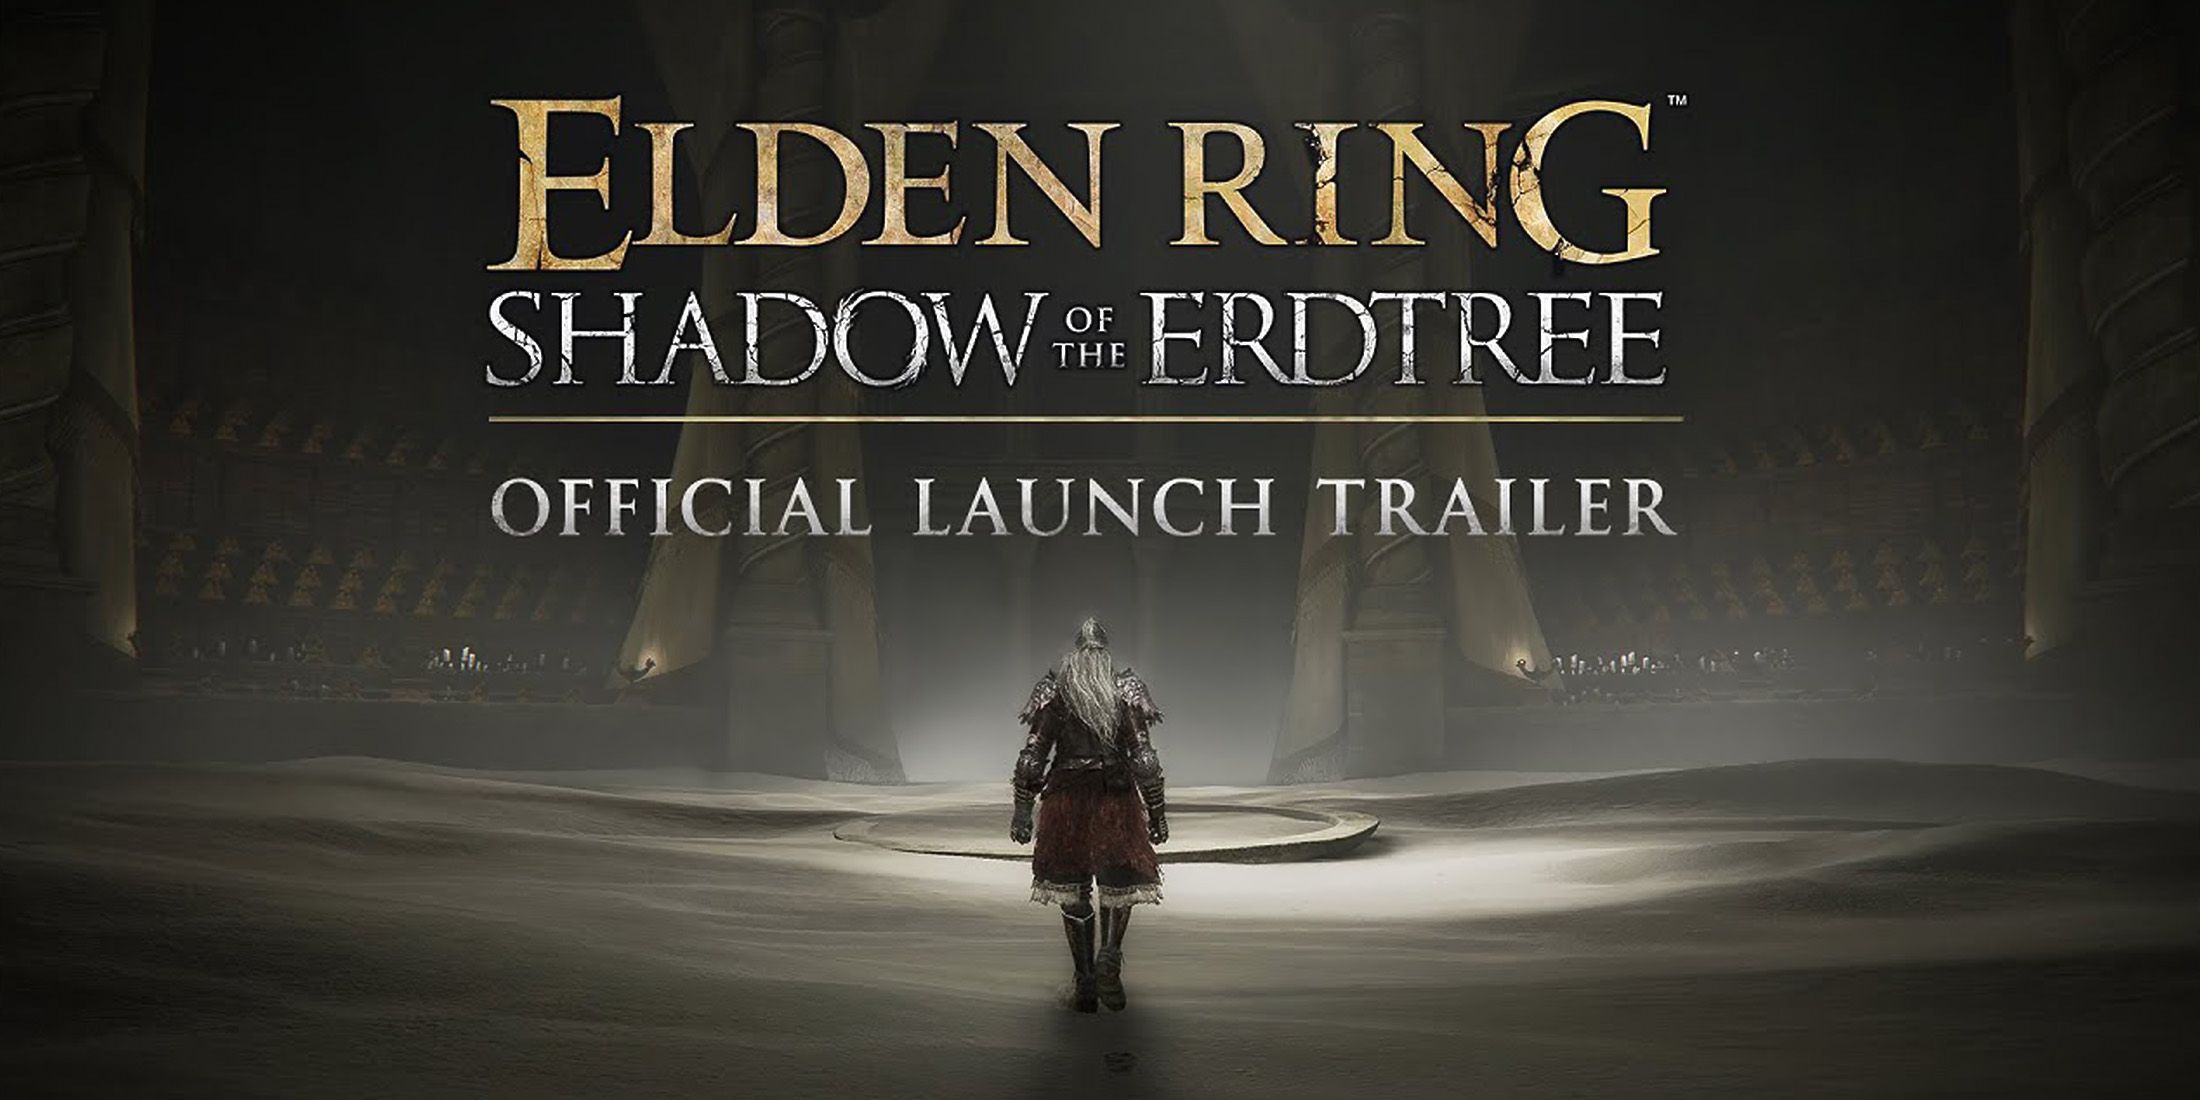 Elden Ring Shadow of the Erdtree Official Launch Trailer Thumbnail 2x1 upscaled